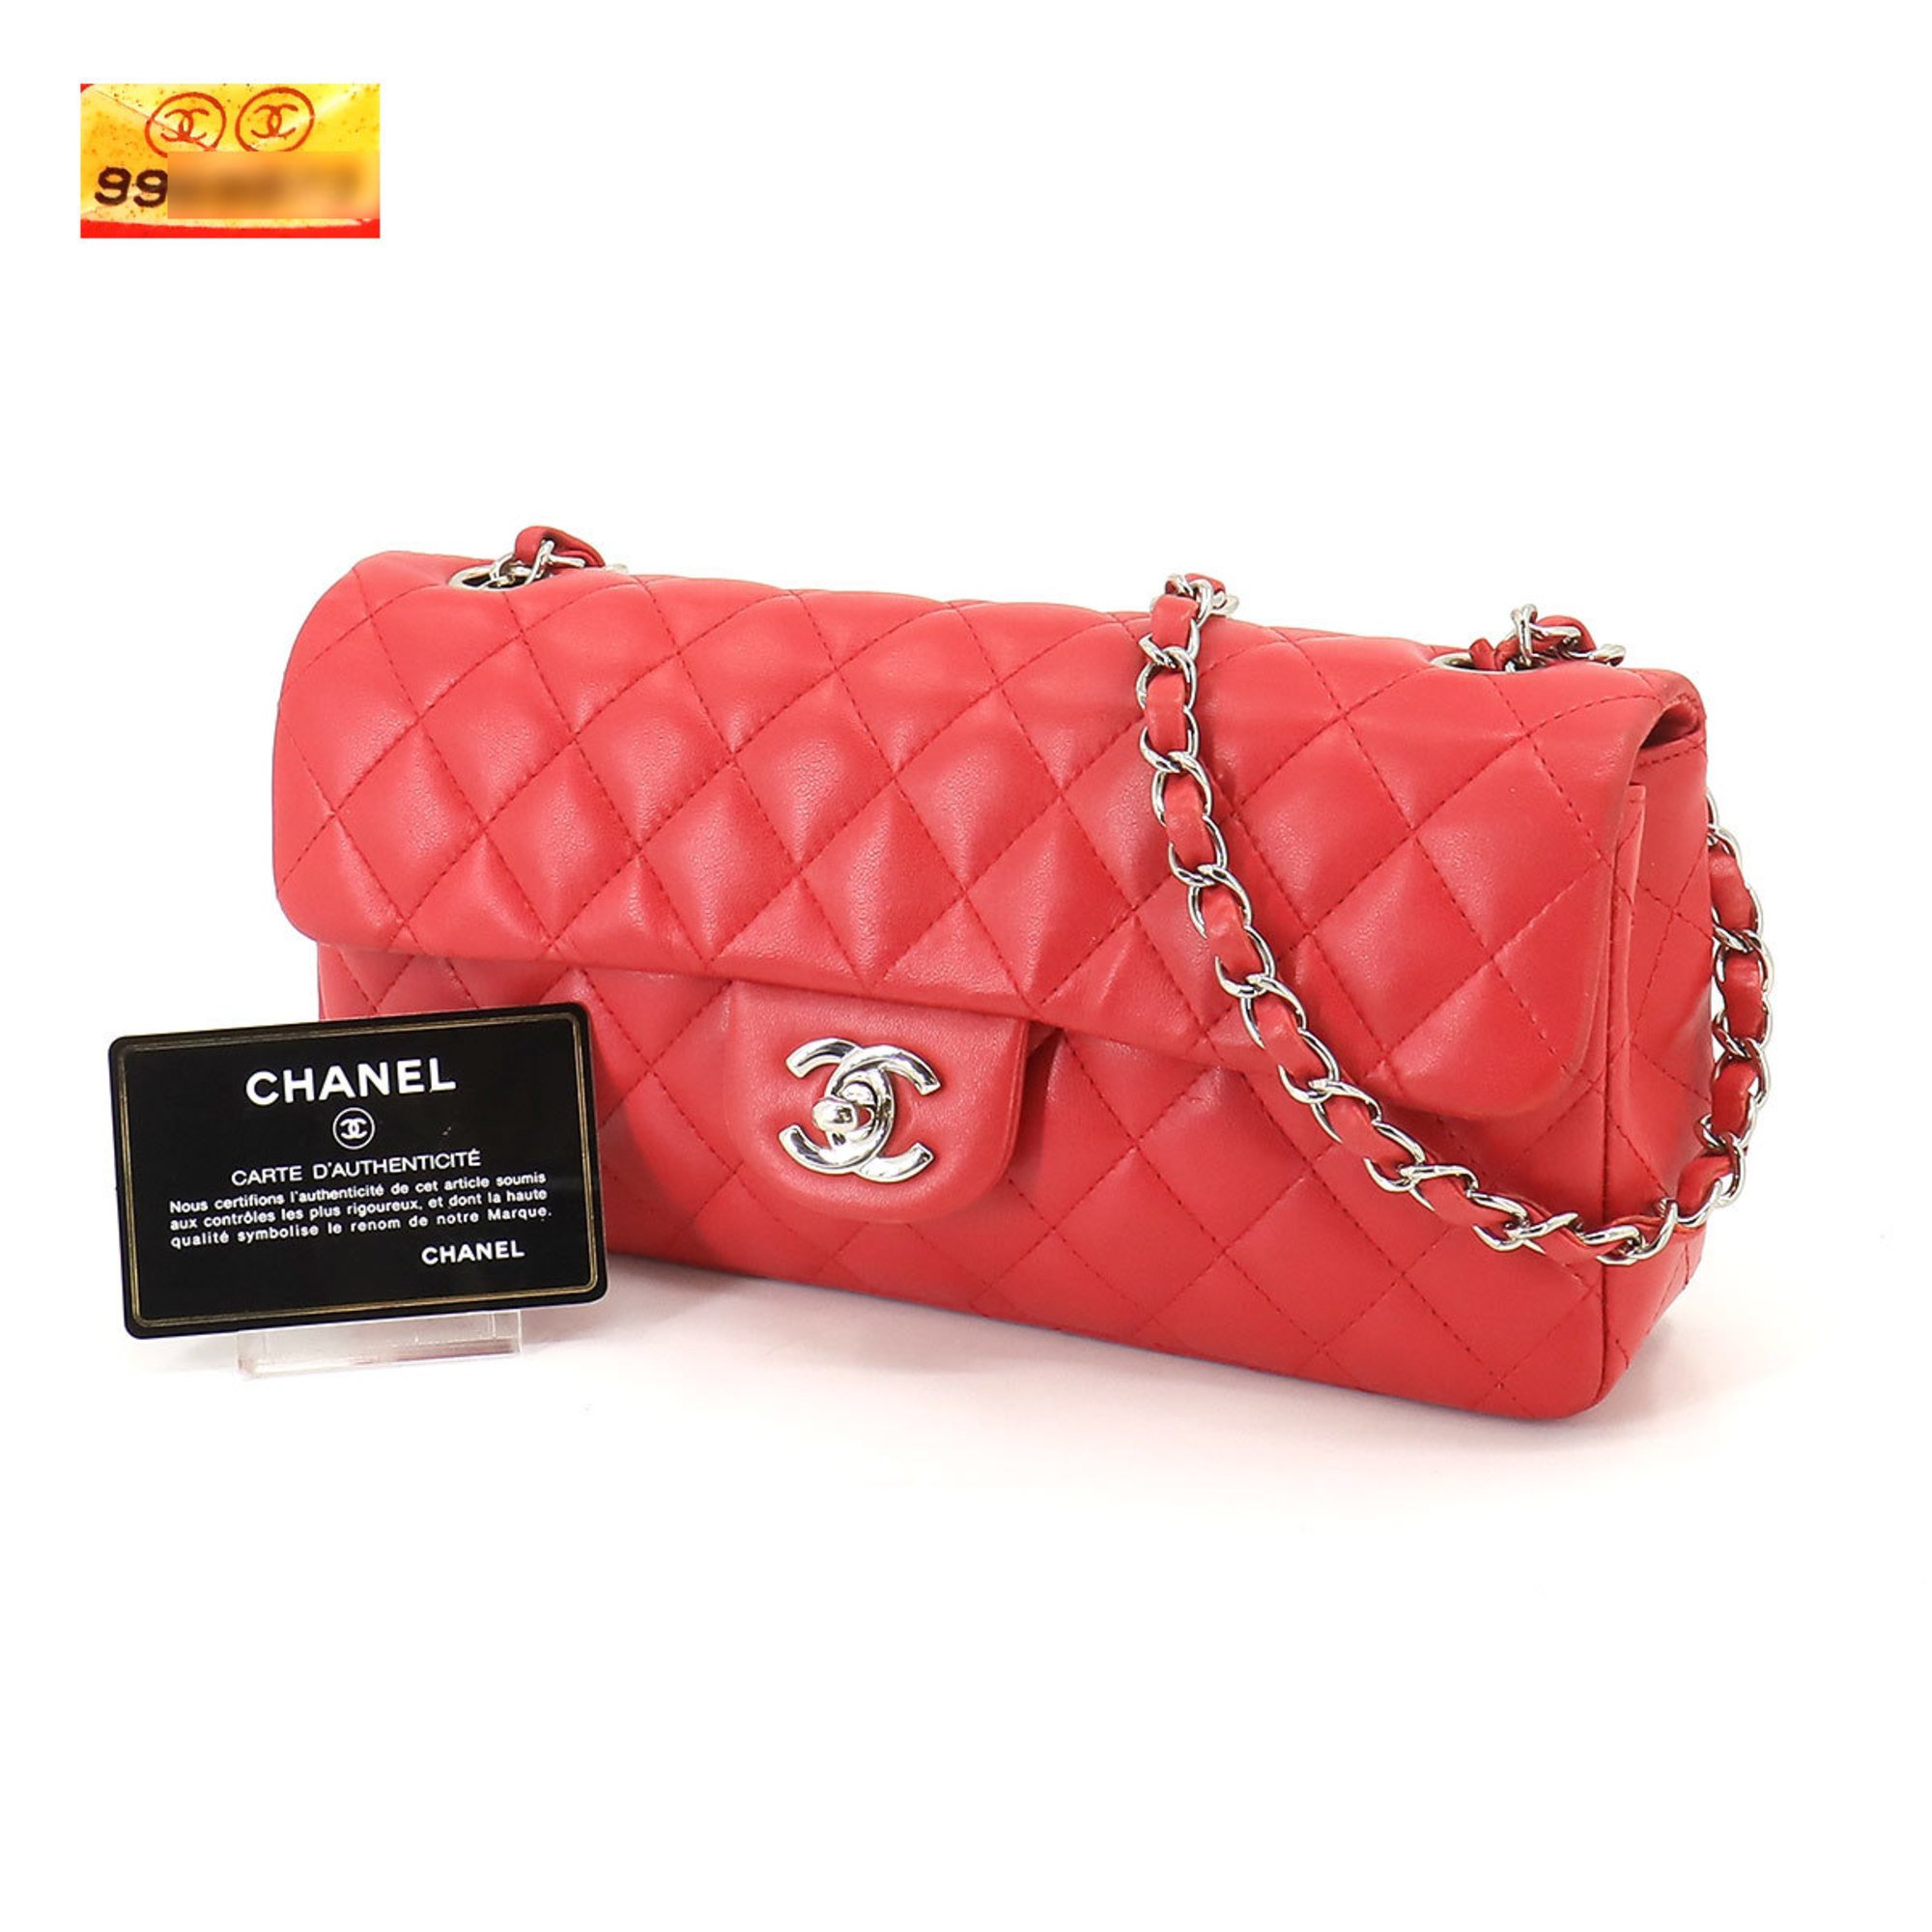 CHANEL Matelasse chain shoulder bag leather red silver metal fittings here mark Bag